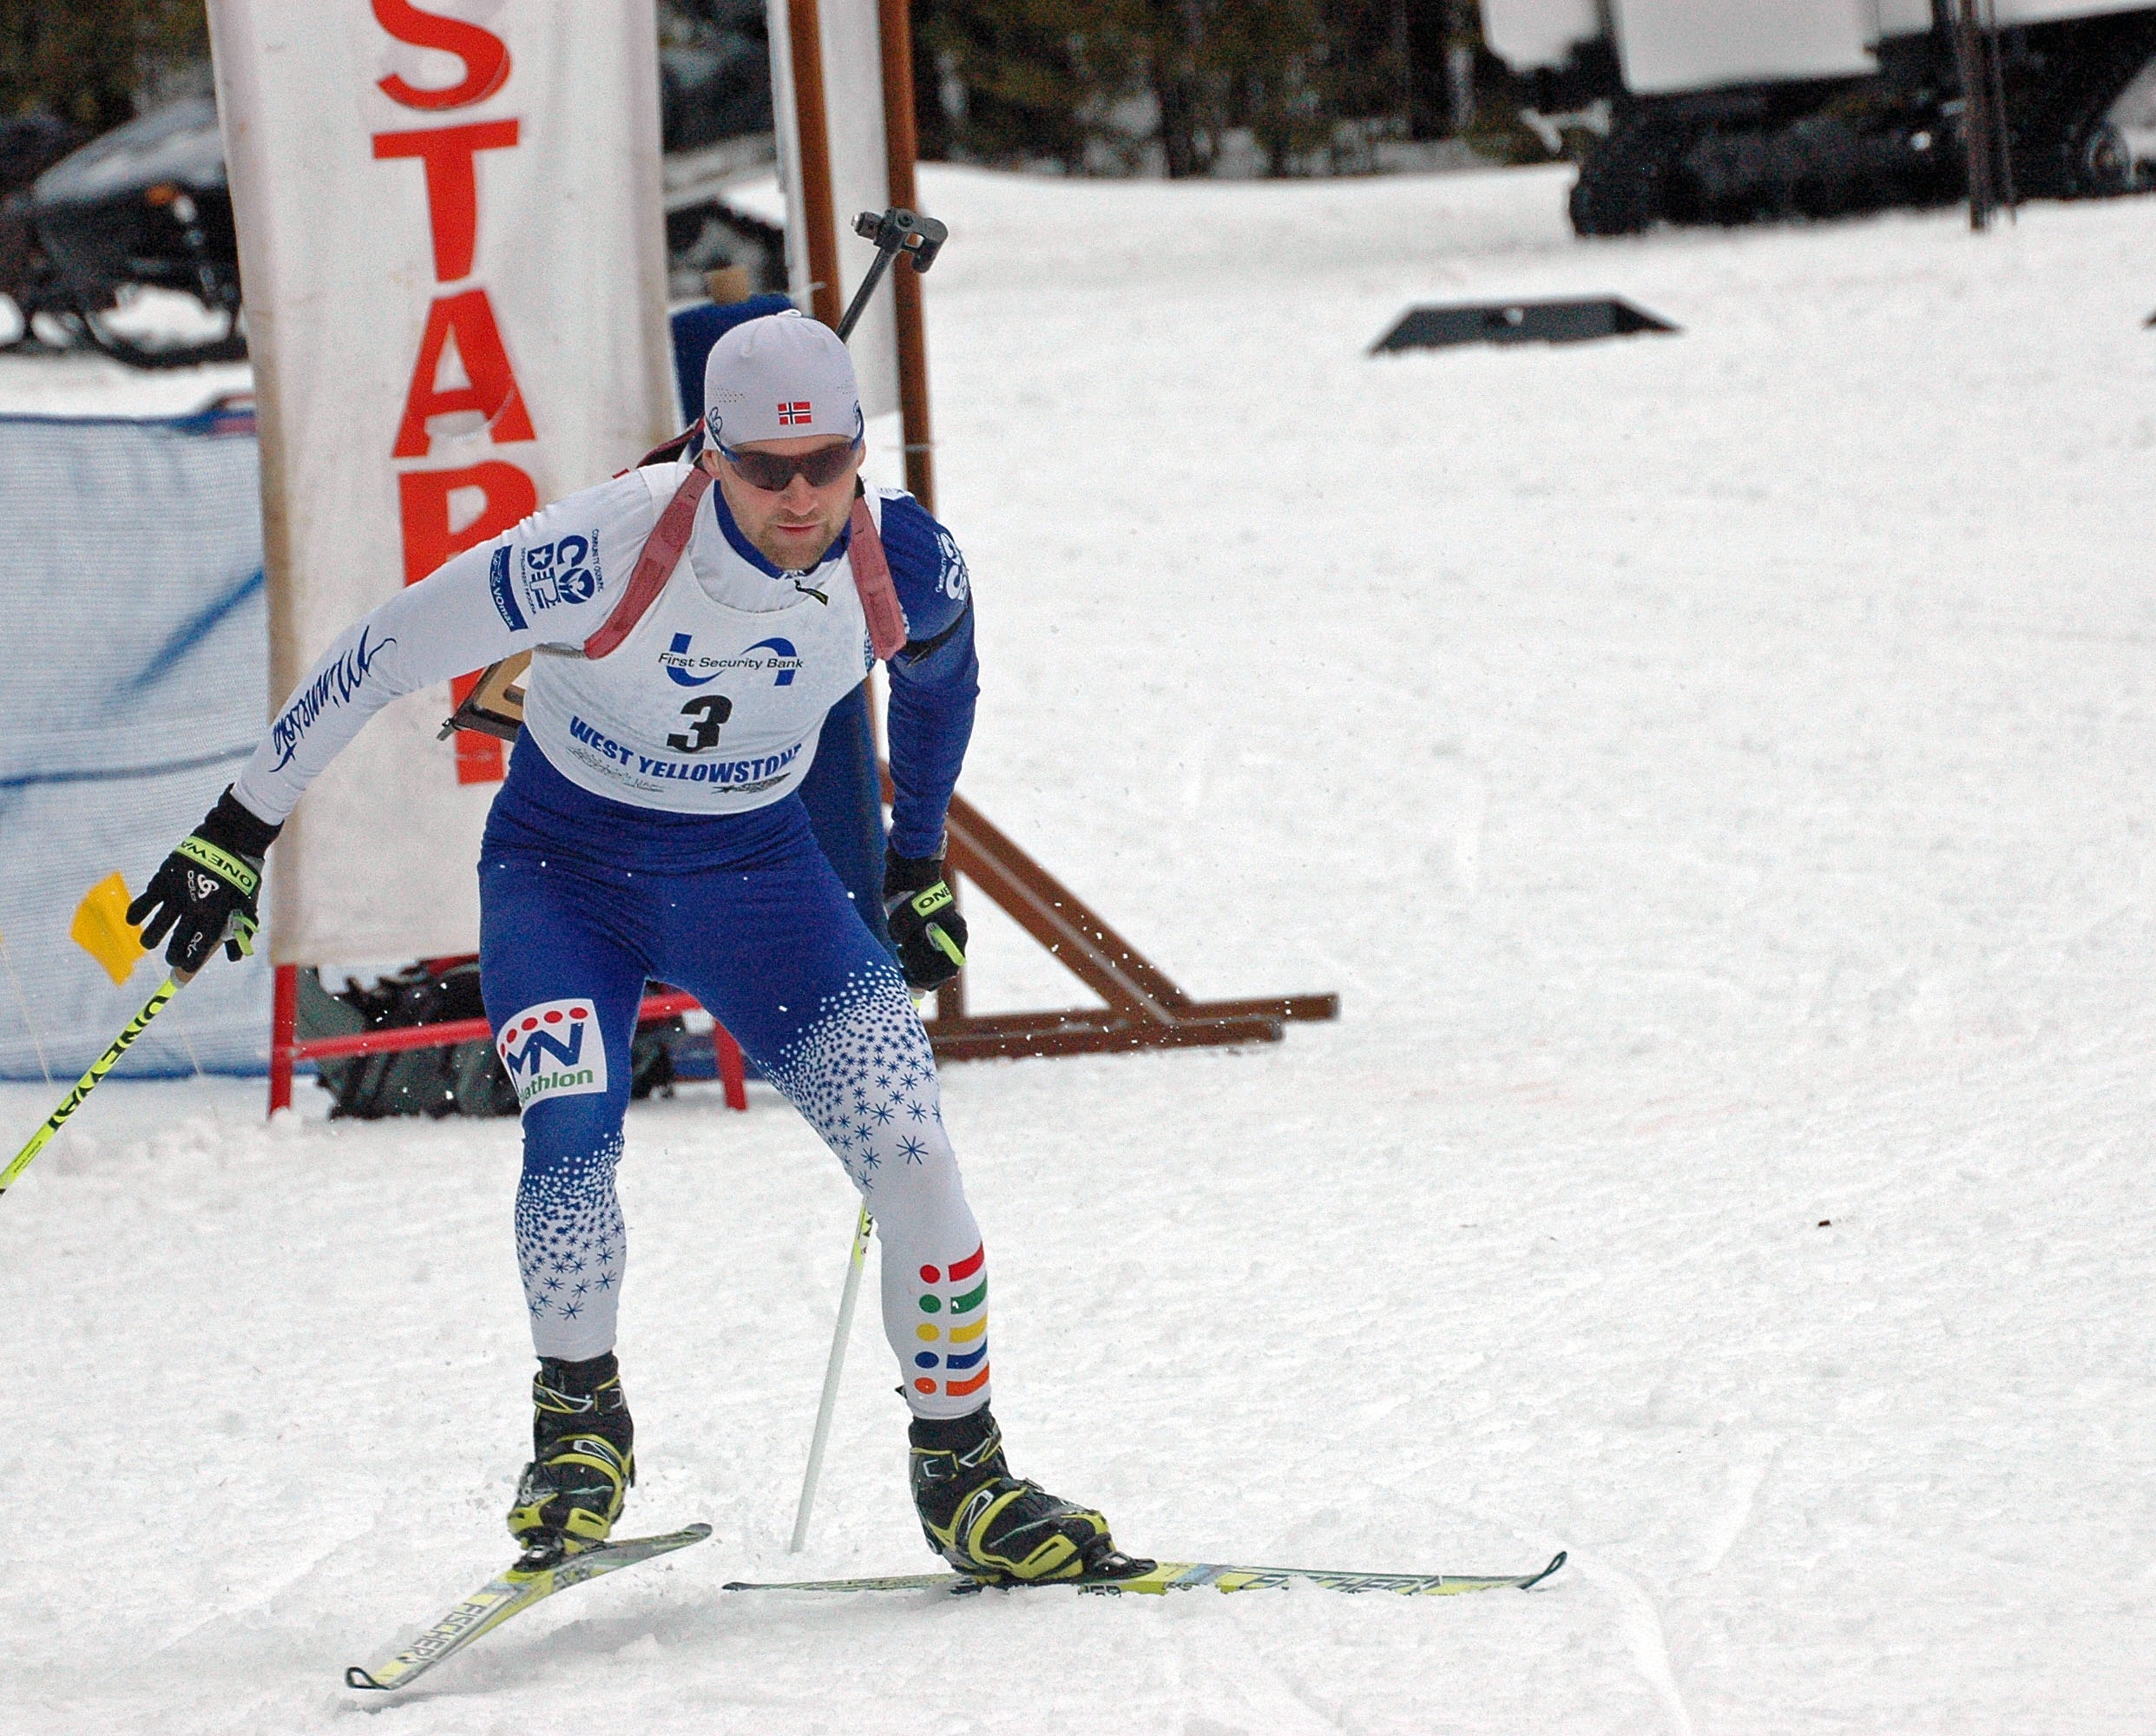 Fresh from Europe, Nordgren and Cook Take Sprint Titles at U.S. Biathlon Nationals